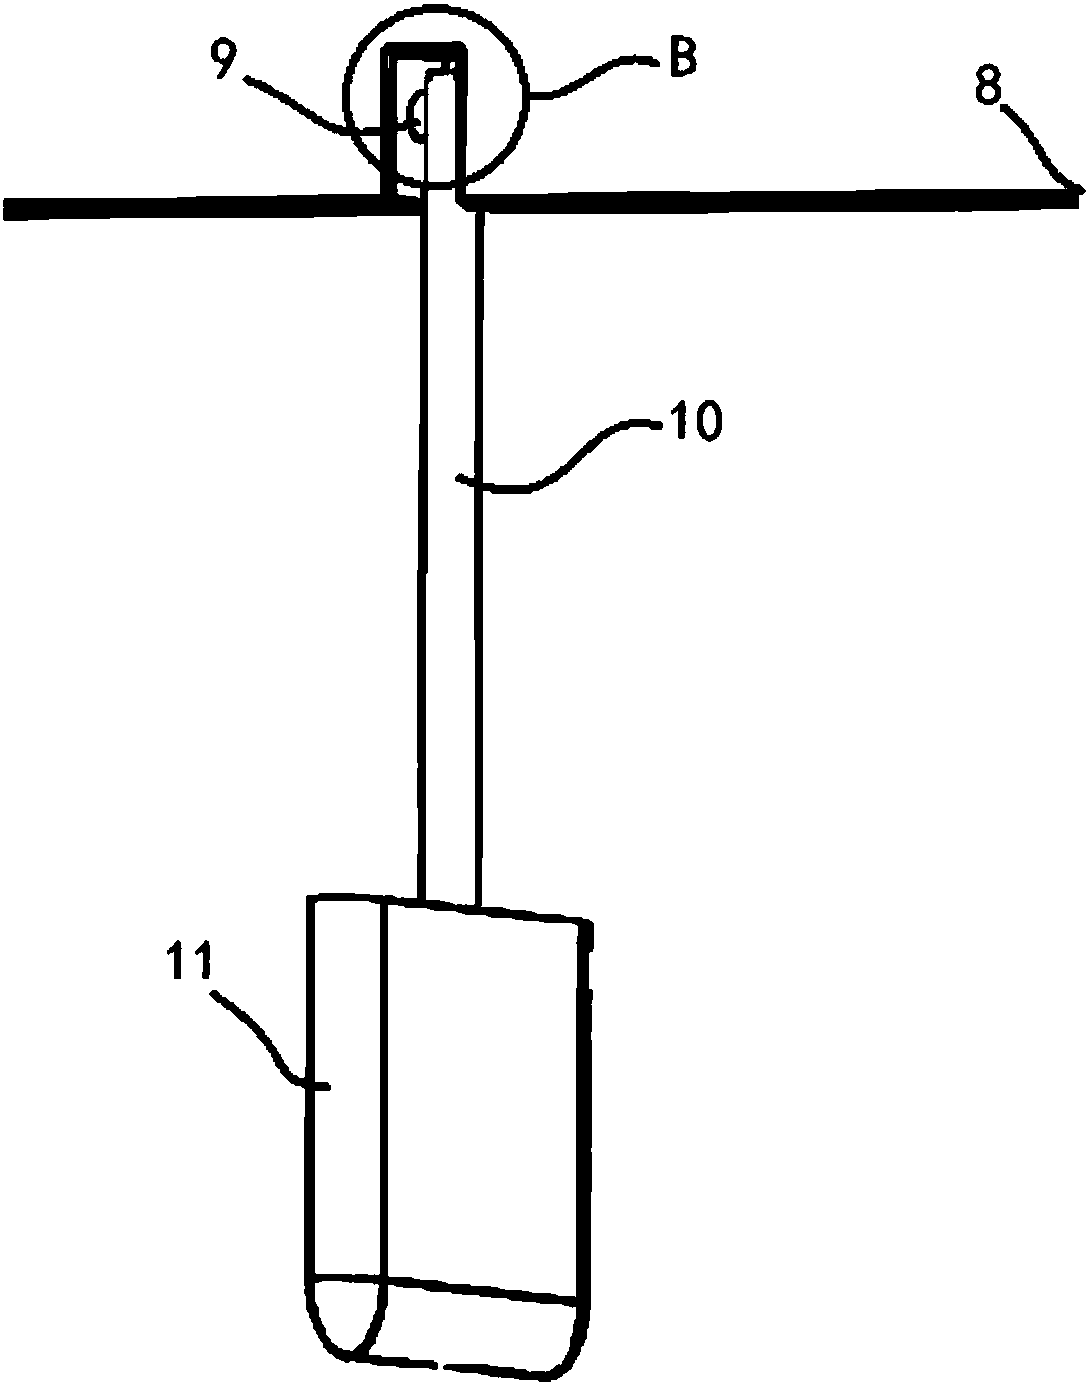 Fish classification device of interrupted bamboo-joint type nonlinear structure